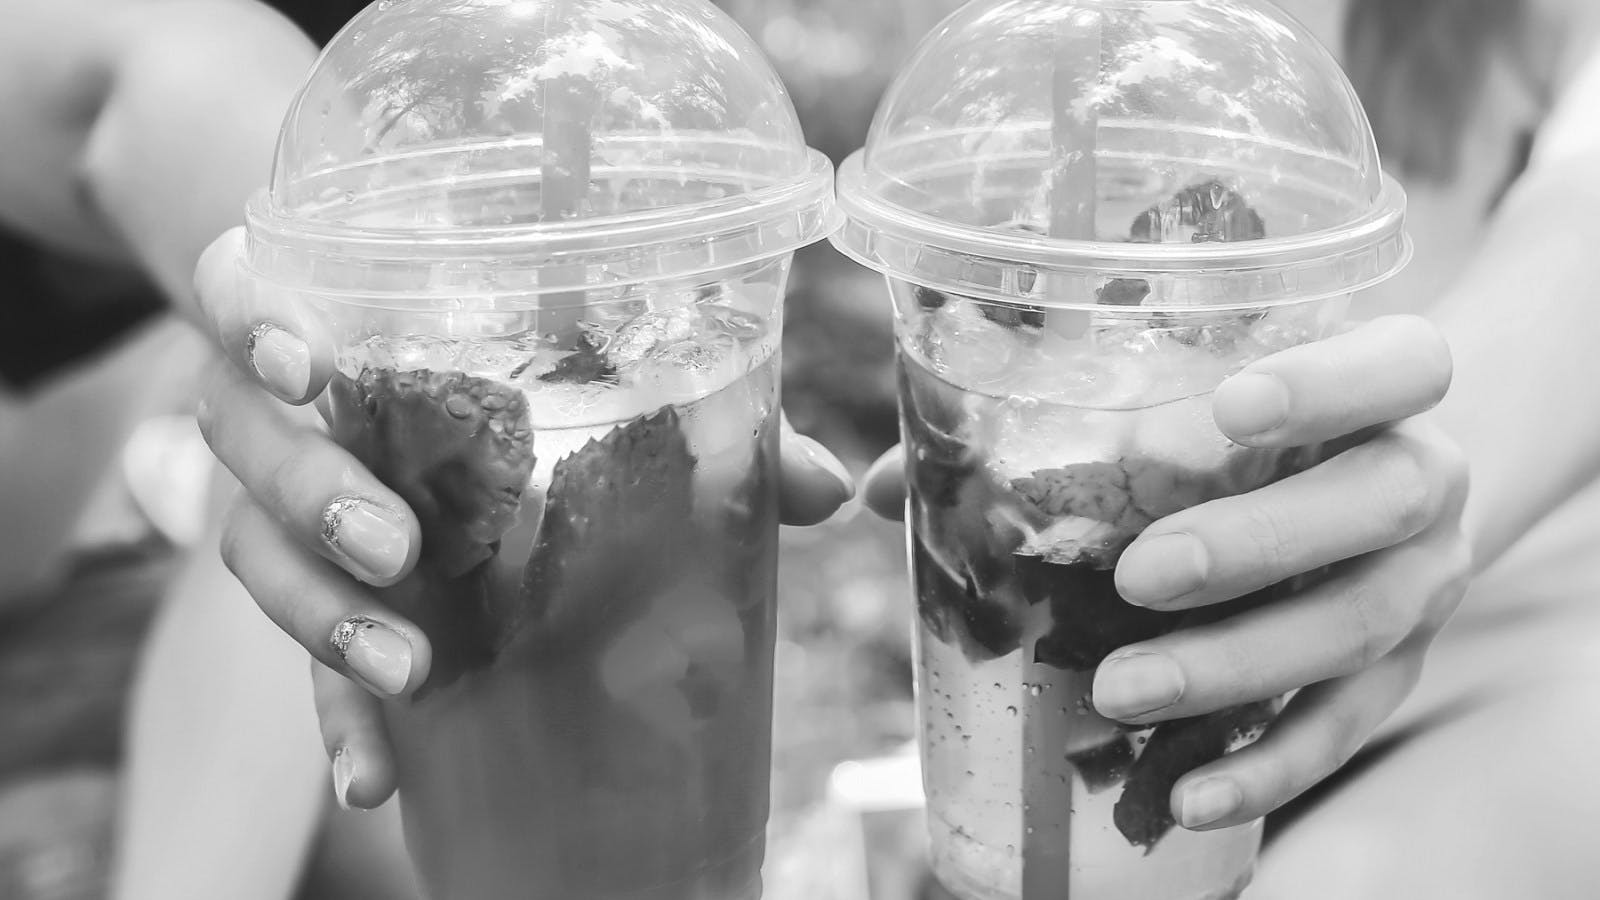 How Brand Leaders Can Make the Most of the To-Go Cocktail Trend